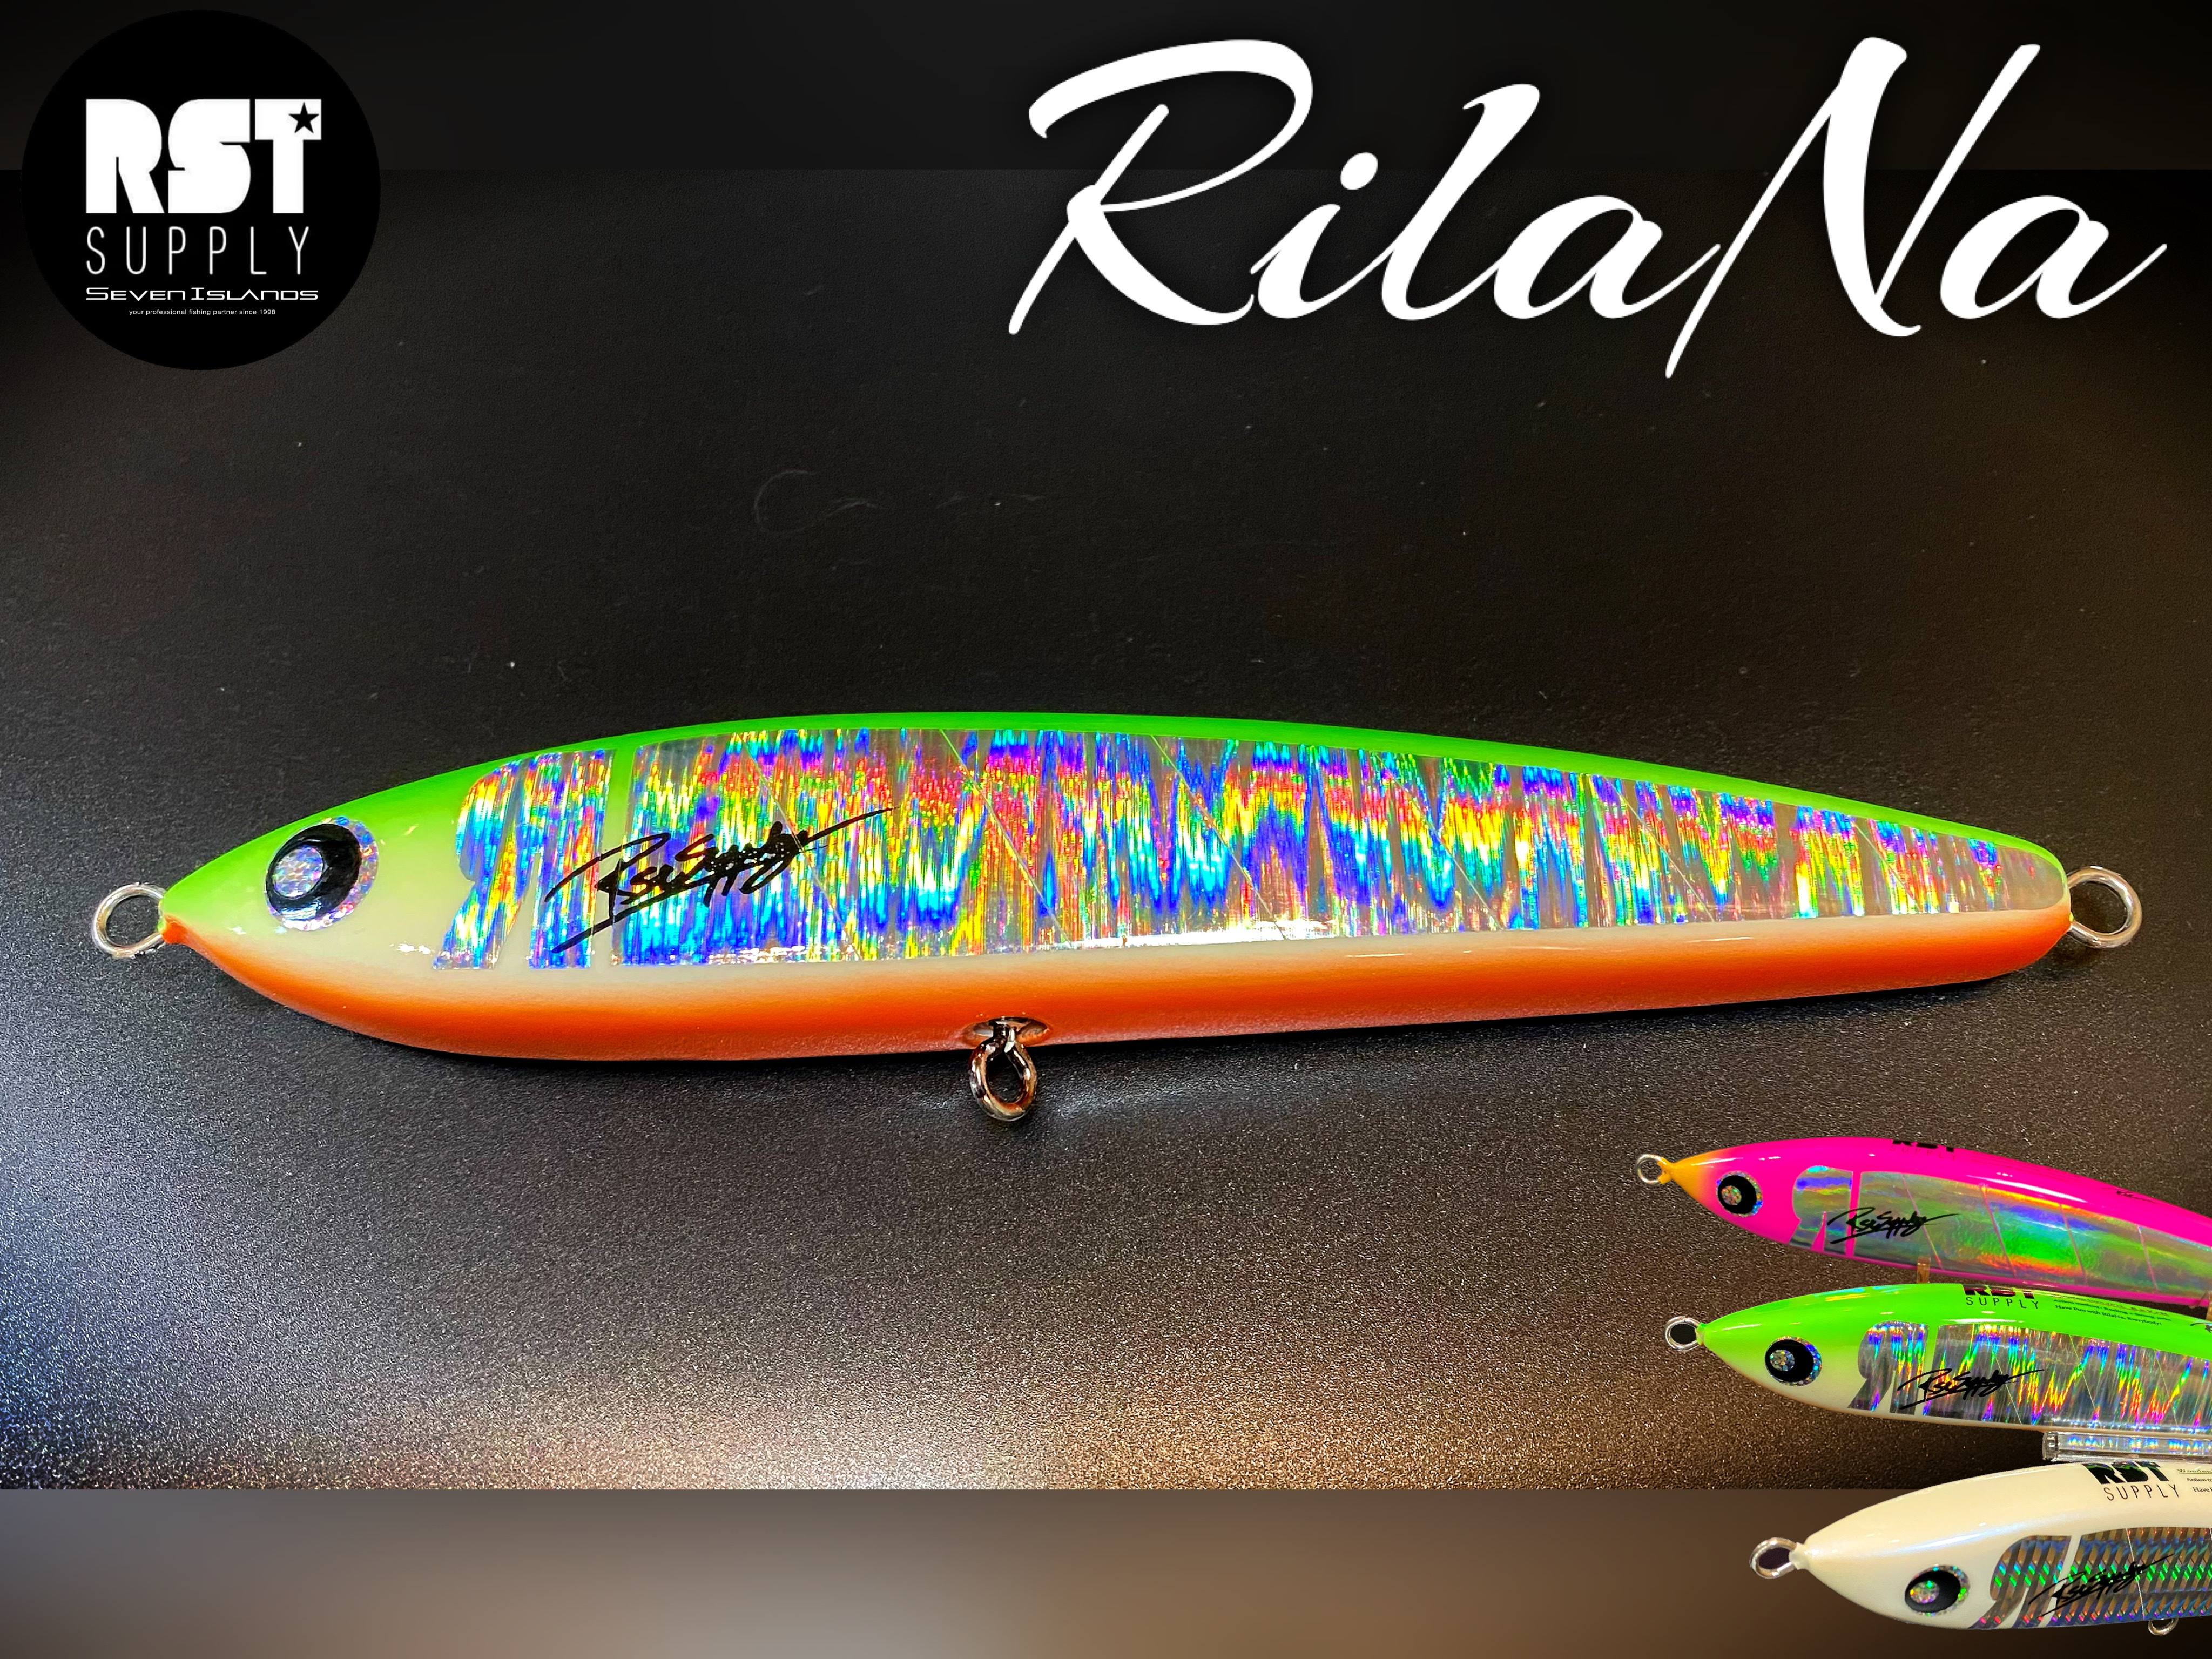 RST SUPPLY RilaNa 180 HAND-MADE CASTING WOOD LURE Speci